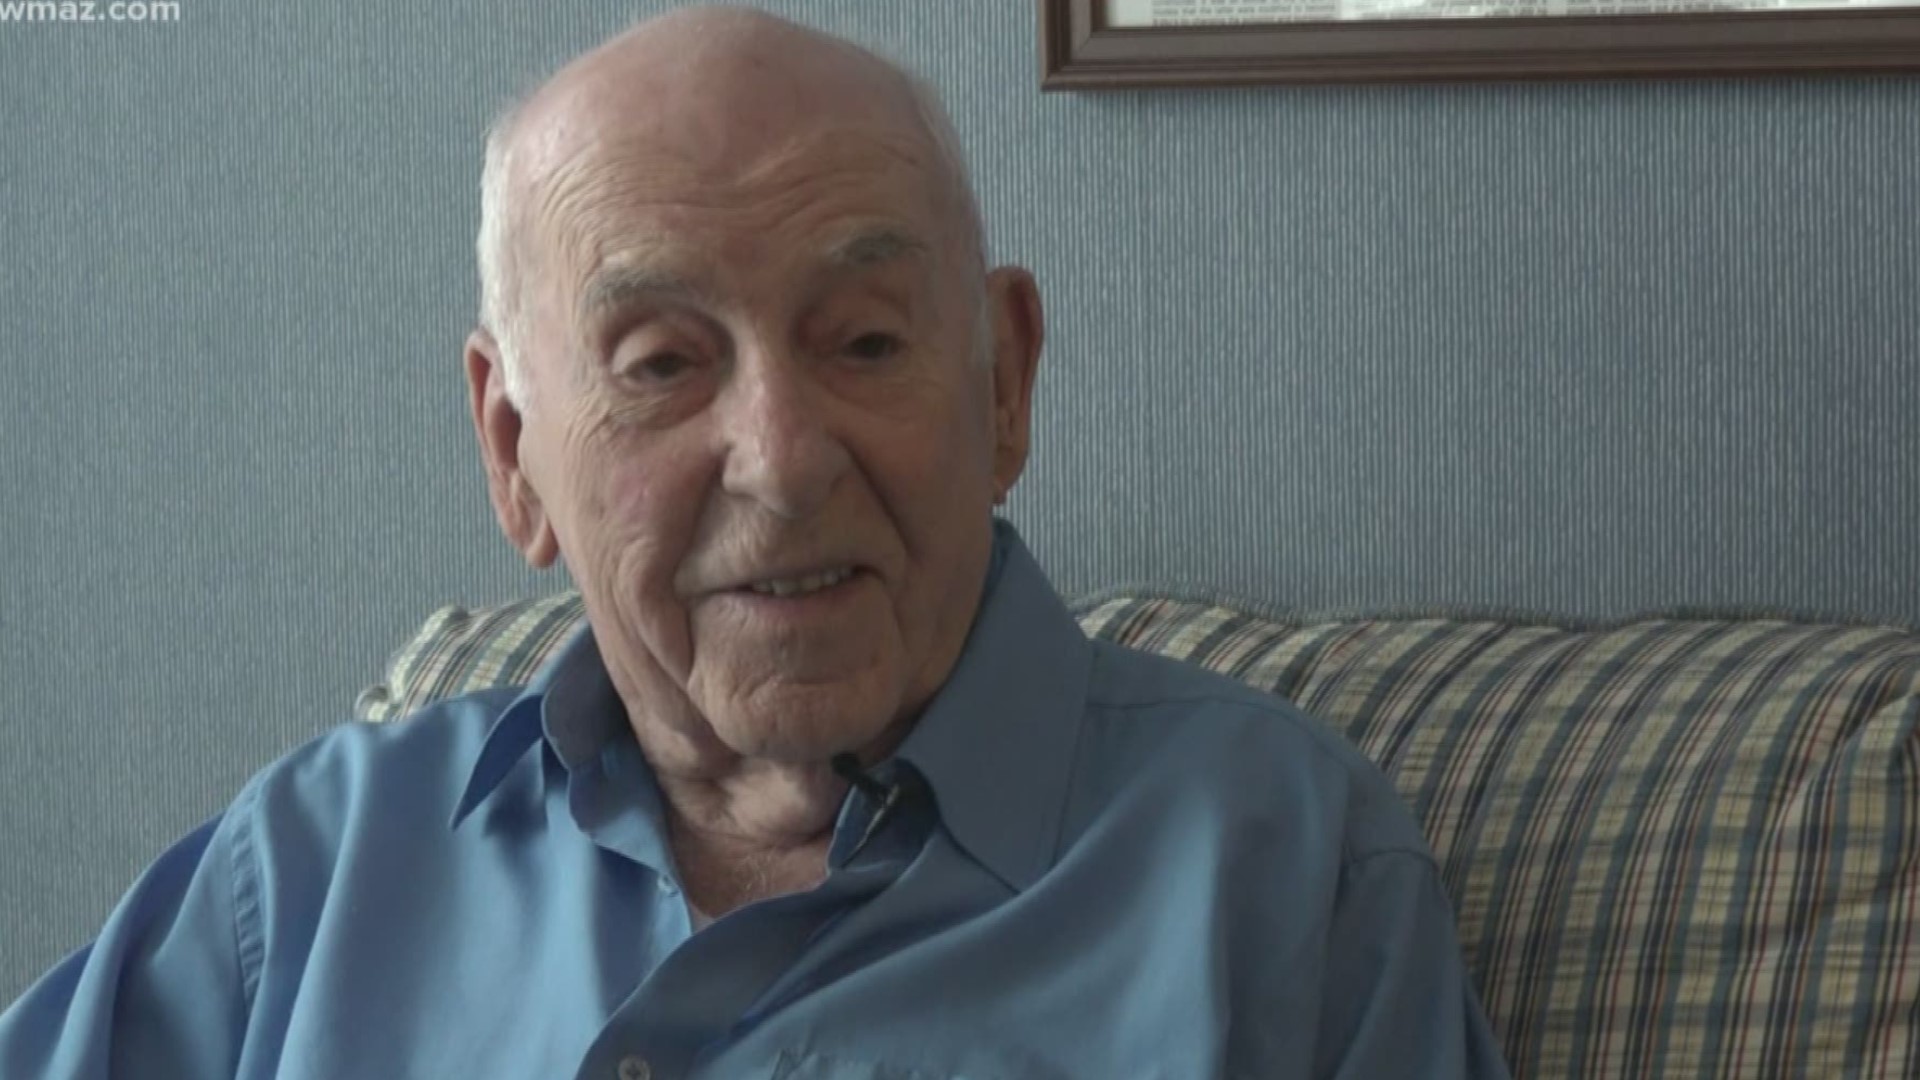 Veteran Robert Phillips has served in three major wars and turned 96 this week. Hear what he says are the keys to life.